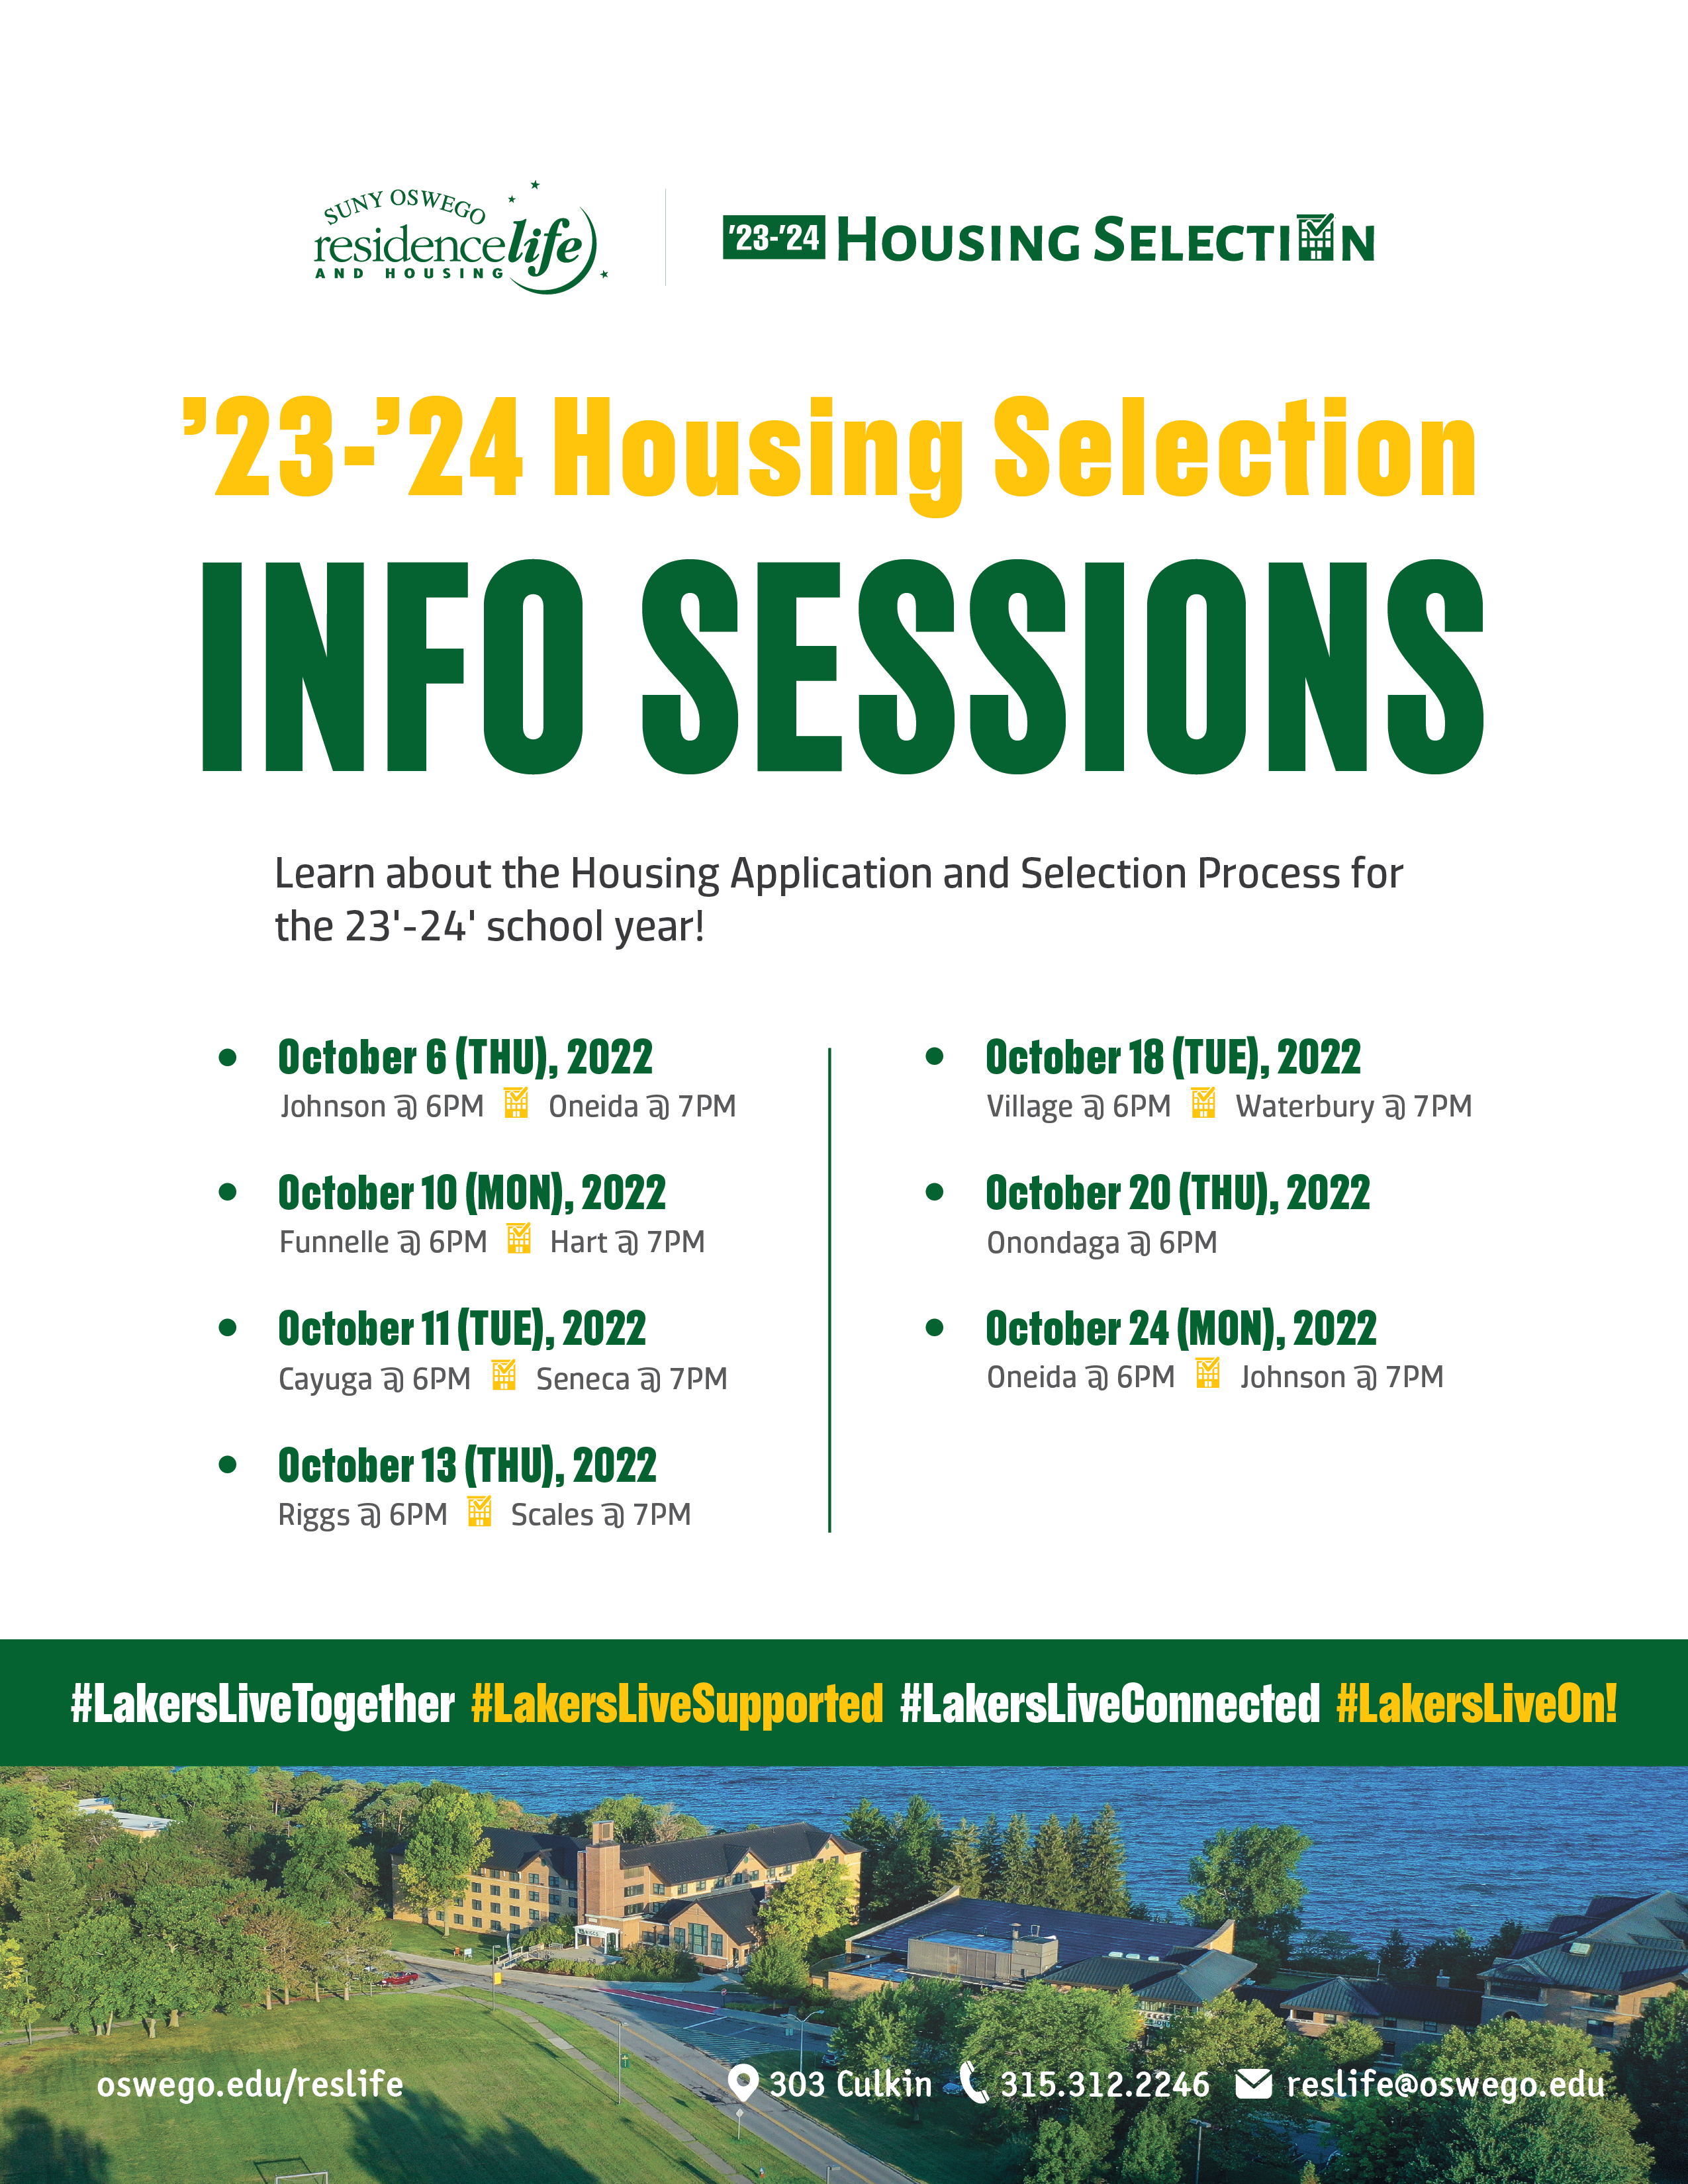 Flyer with dates for Housing Selection Info Sessions in October 2022. Please review text on webpage for dates of Info Sessions